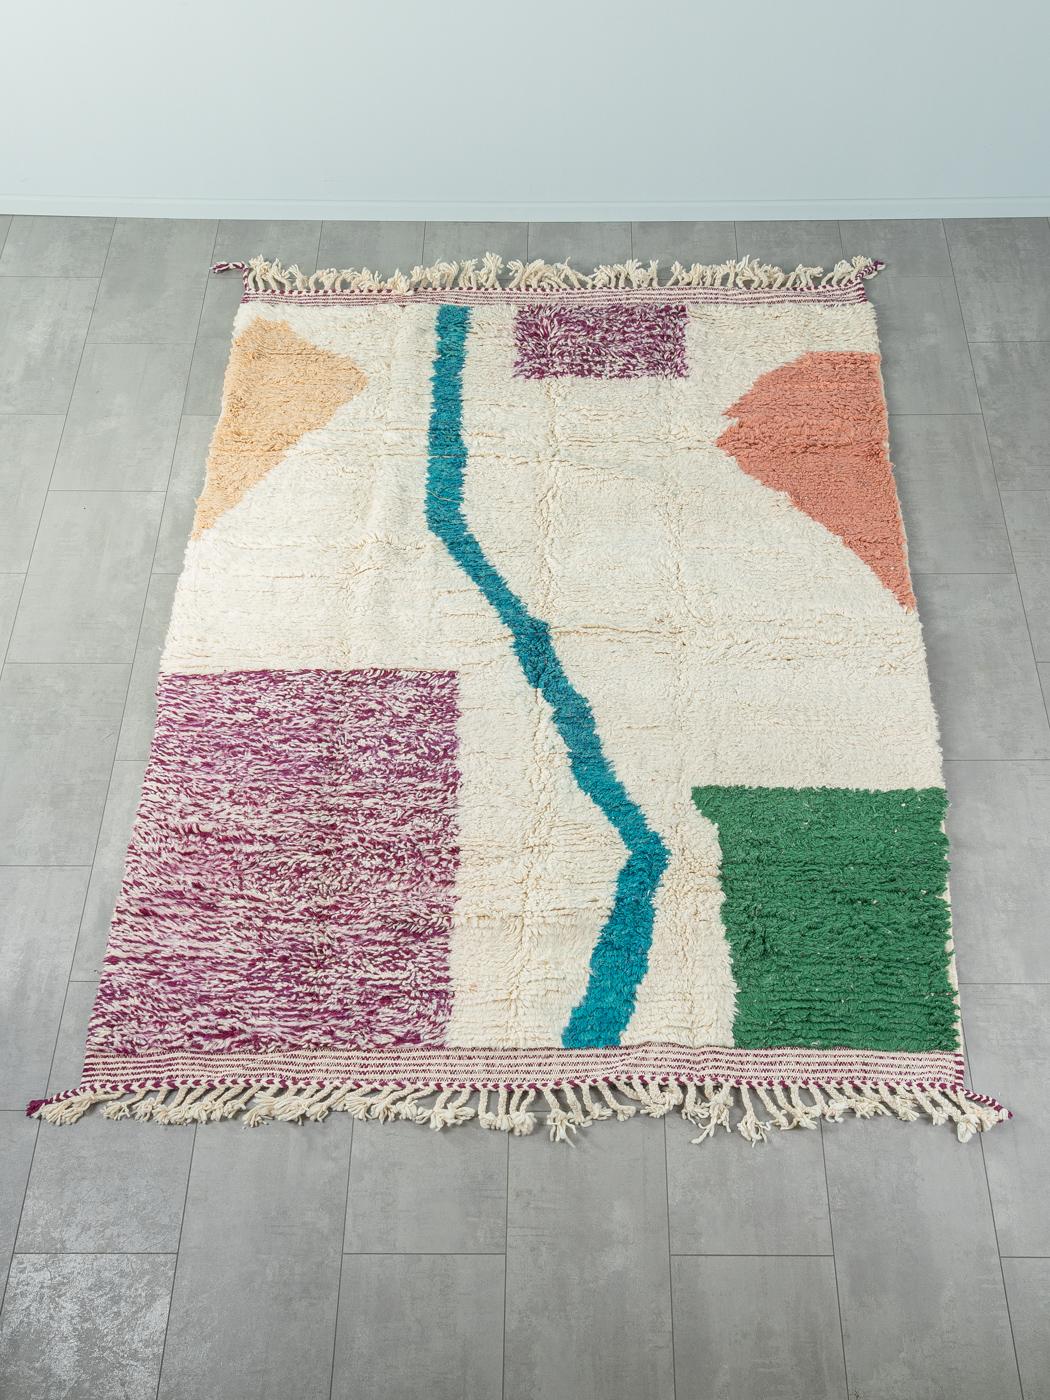 Abstraction is a contemporary 100% wool rug – thick and soft, comfortable underfoot. Our Berber rugs are handwoven and handknotted by Amazigh women in the Atlas Mountains. These communities have been crafting rugs for thousands of years. One knot at